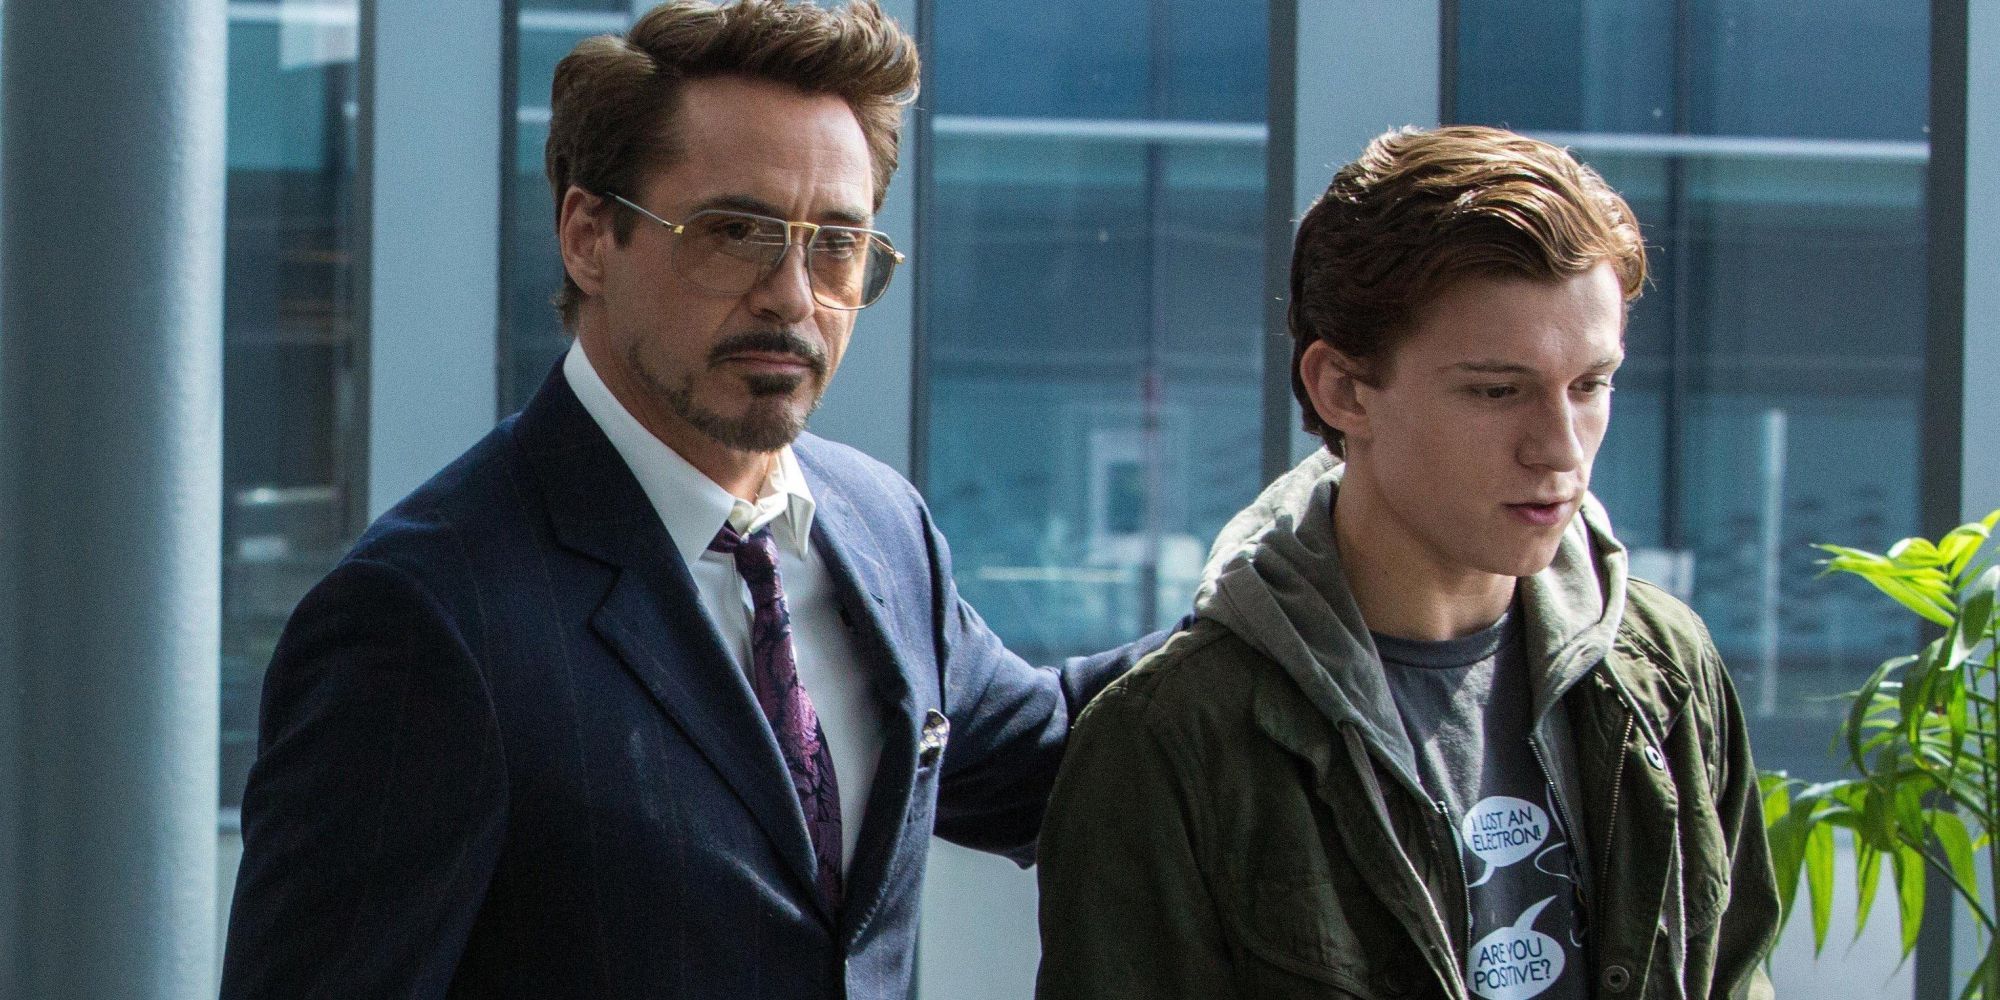 Robert Downey Jr and Tom Holland in Spider-Man Homecoming